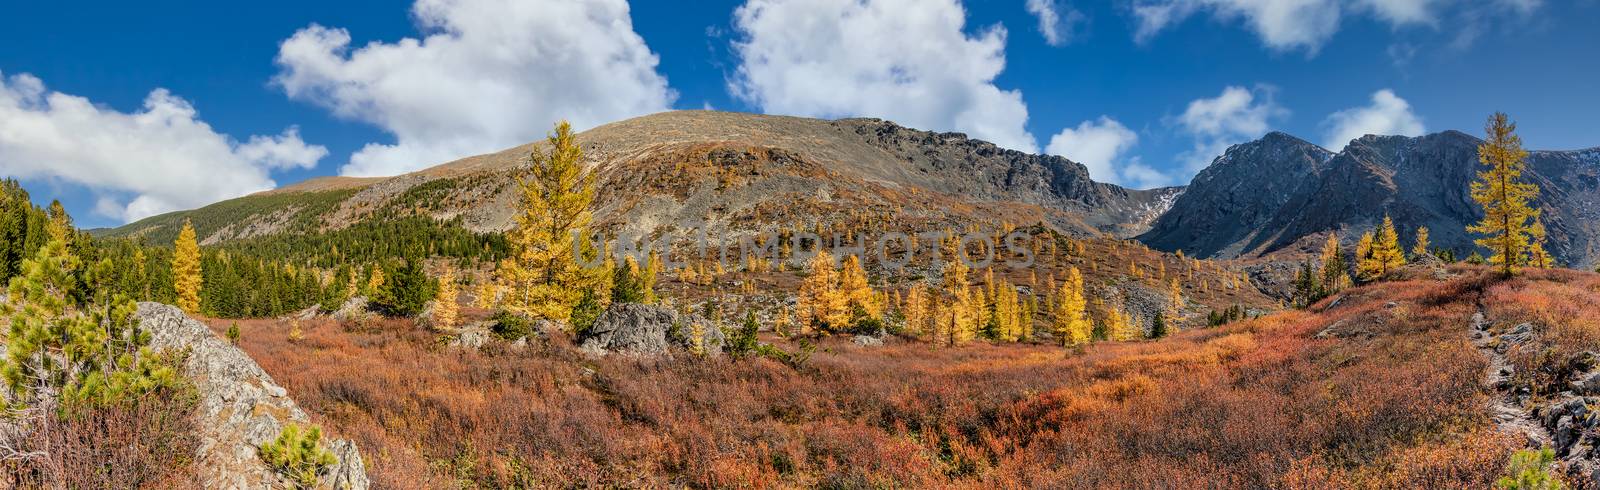 Altai mountains. Beautiful highland autumn panoramic landscape. Rocky foreground with golden trees. Blue cloudy sky as a background. Russia. Siberia by DamantisZ